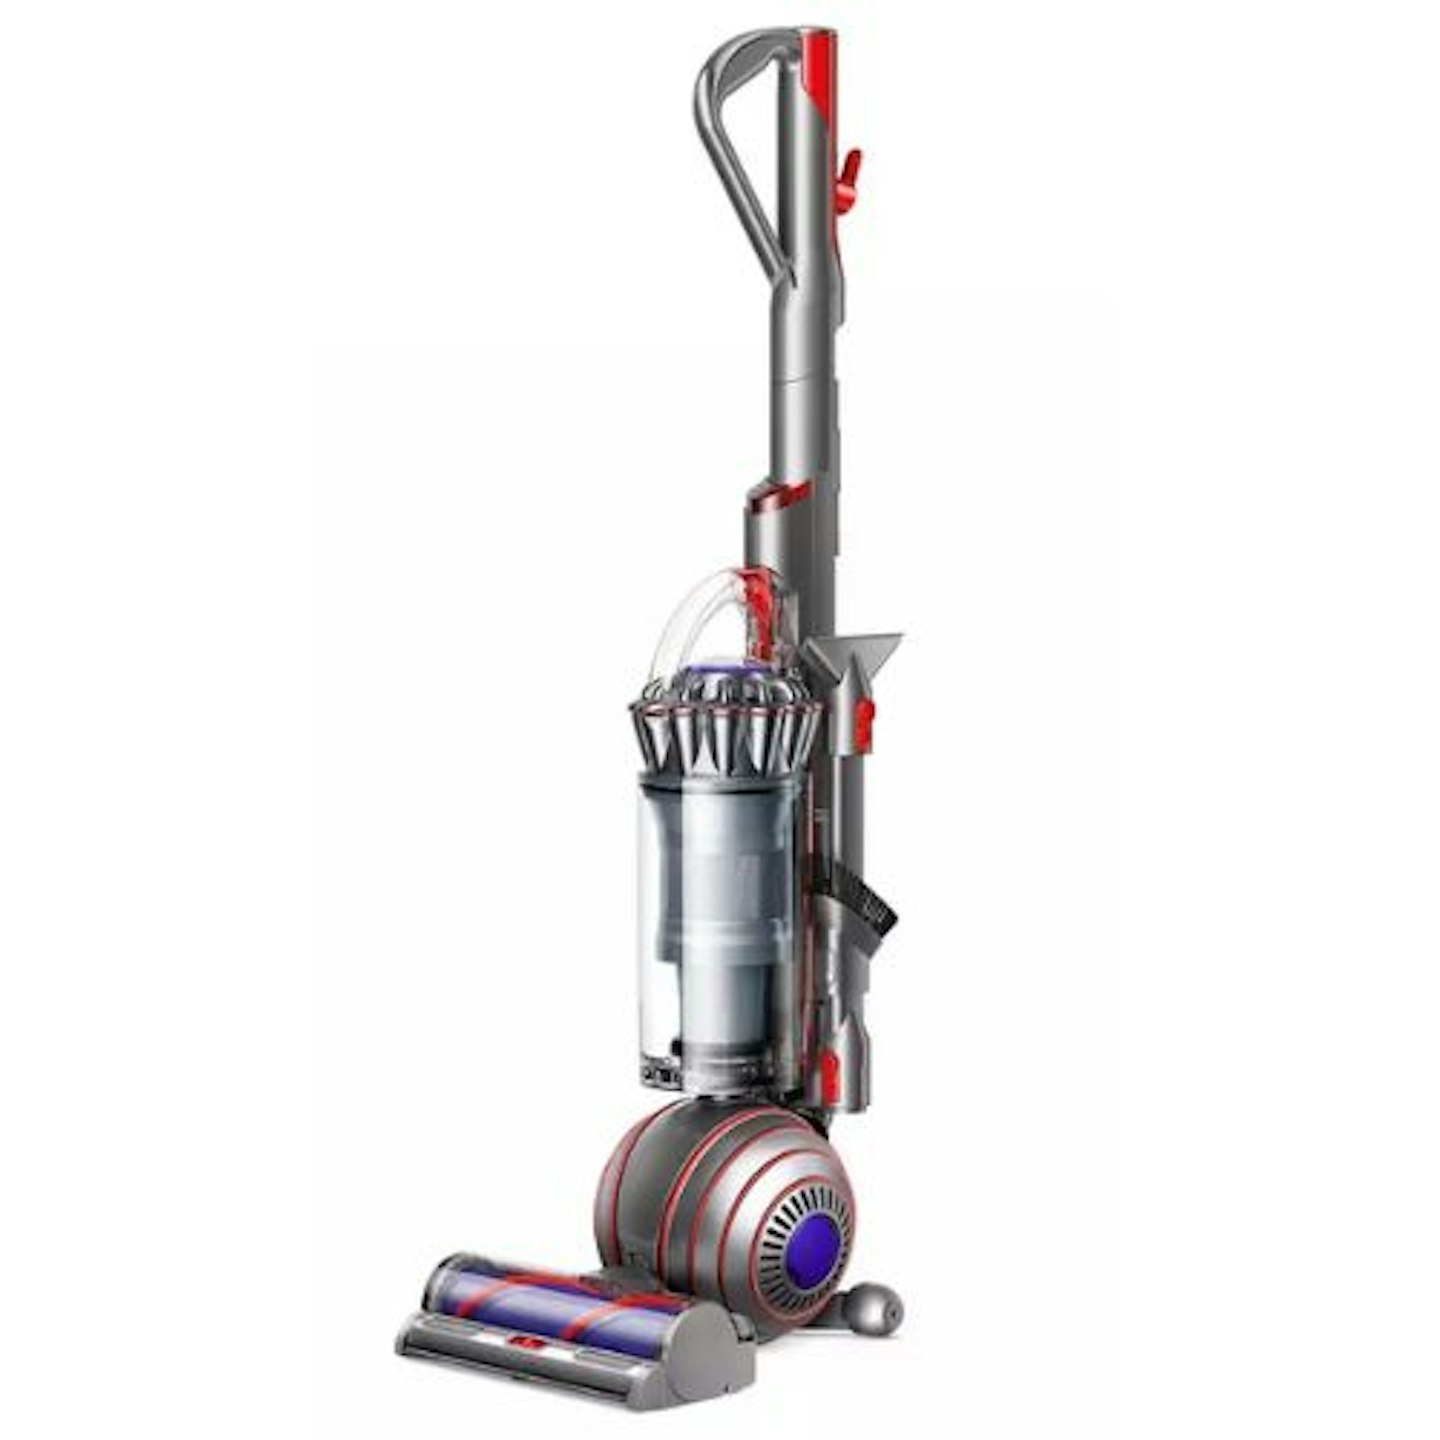 Best vacuum cleaner Dyson Ball Animal Corded Bagless Upright Vacuum Cleaner